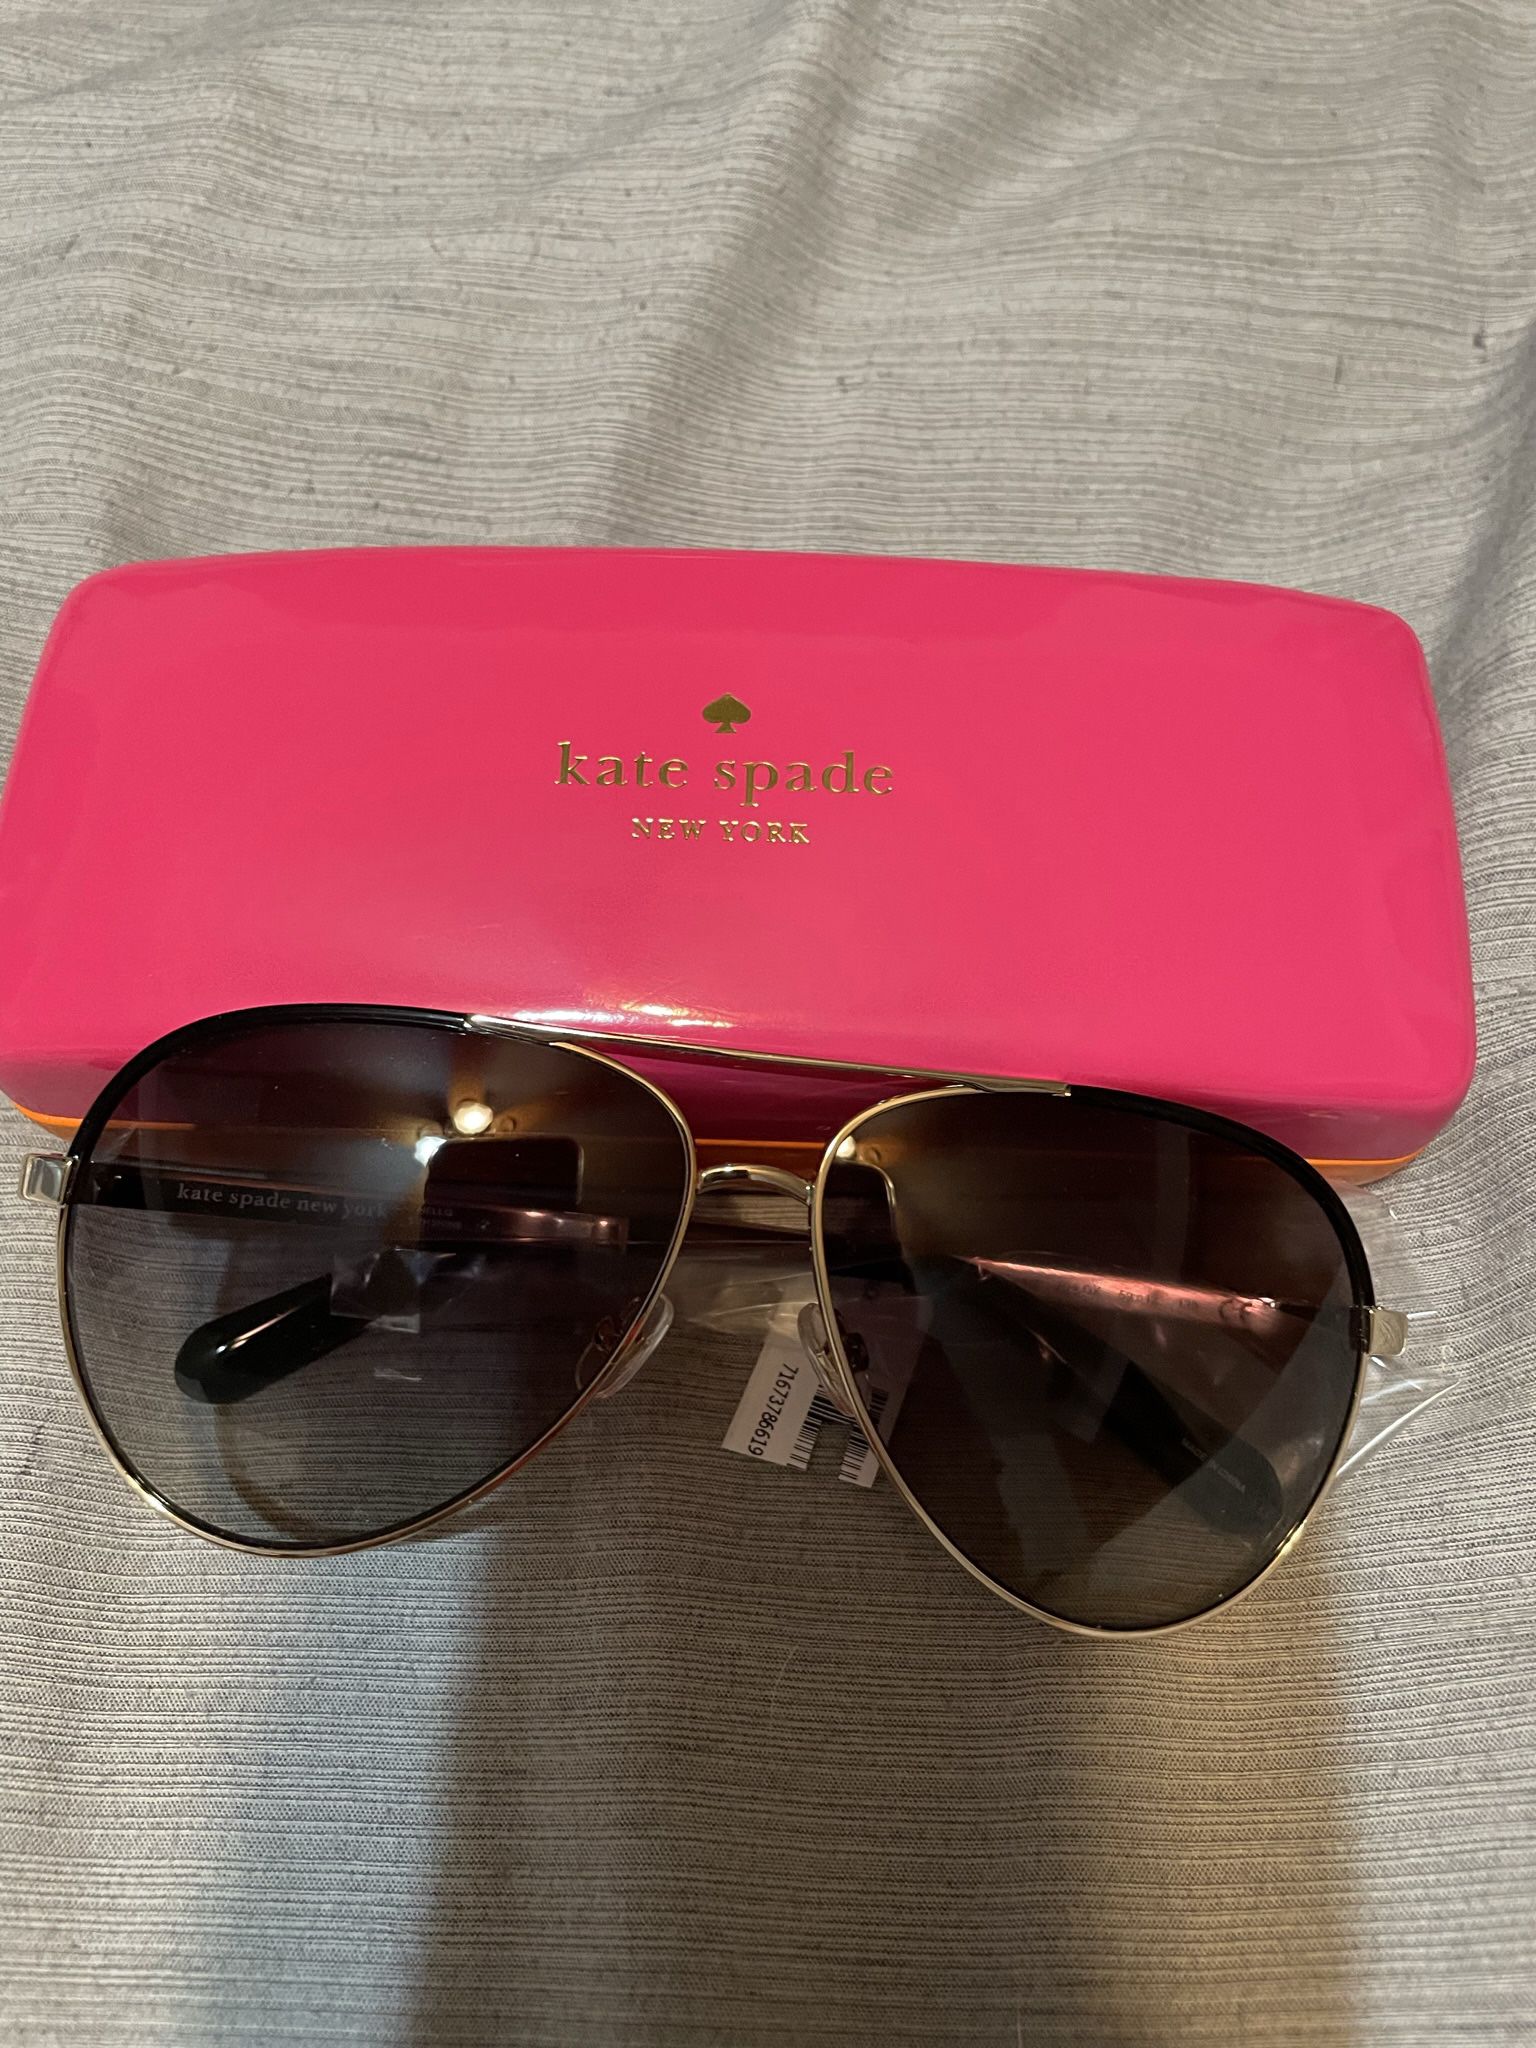 NWT Authentic Kate Spade Aviator Sunglasses for Sale in Belleville, IL -  OfferUp